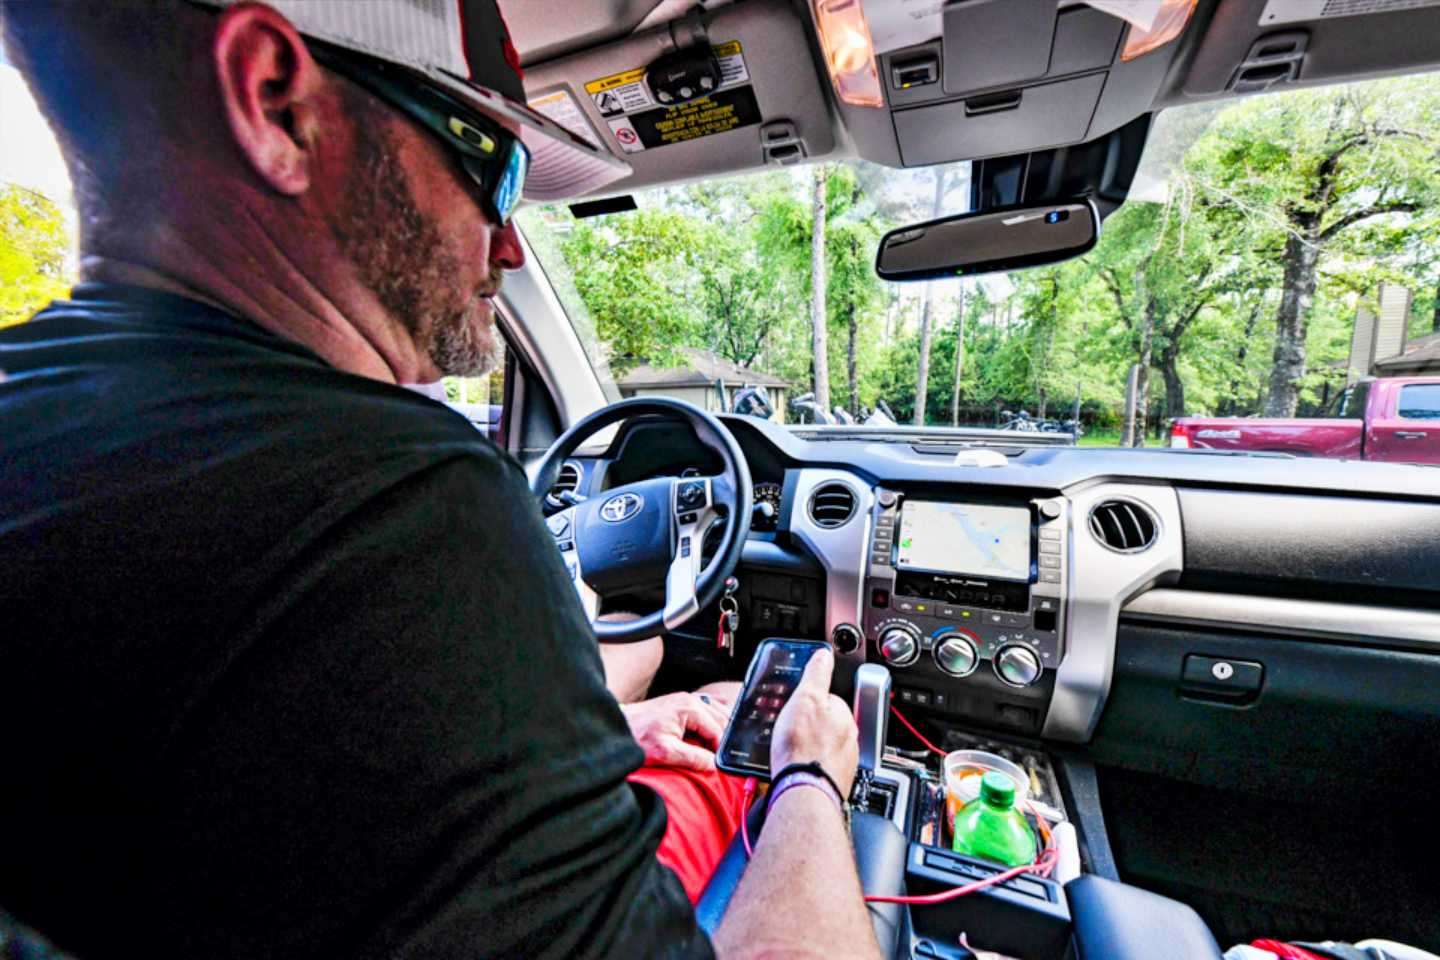 Cherry likes the Apple CarPlay feature of his Toyota Tundra (and itâs Android equivalent). âI donât listen much to music, but I use it all the time for my GPS map app.â All the time literally means what he said. Cherry puts about 60,000 miles on his Tundra over 10 months of traveling between home and the Bassmaster Elite Series. âWe go to so many places that itâs a must for me.â 